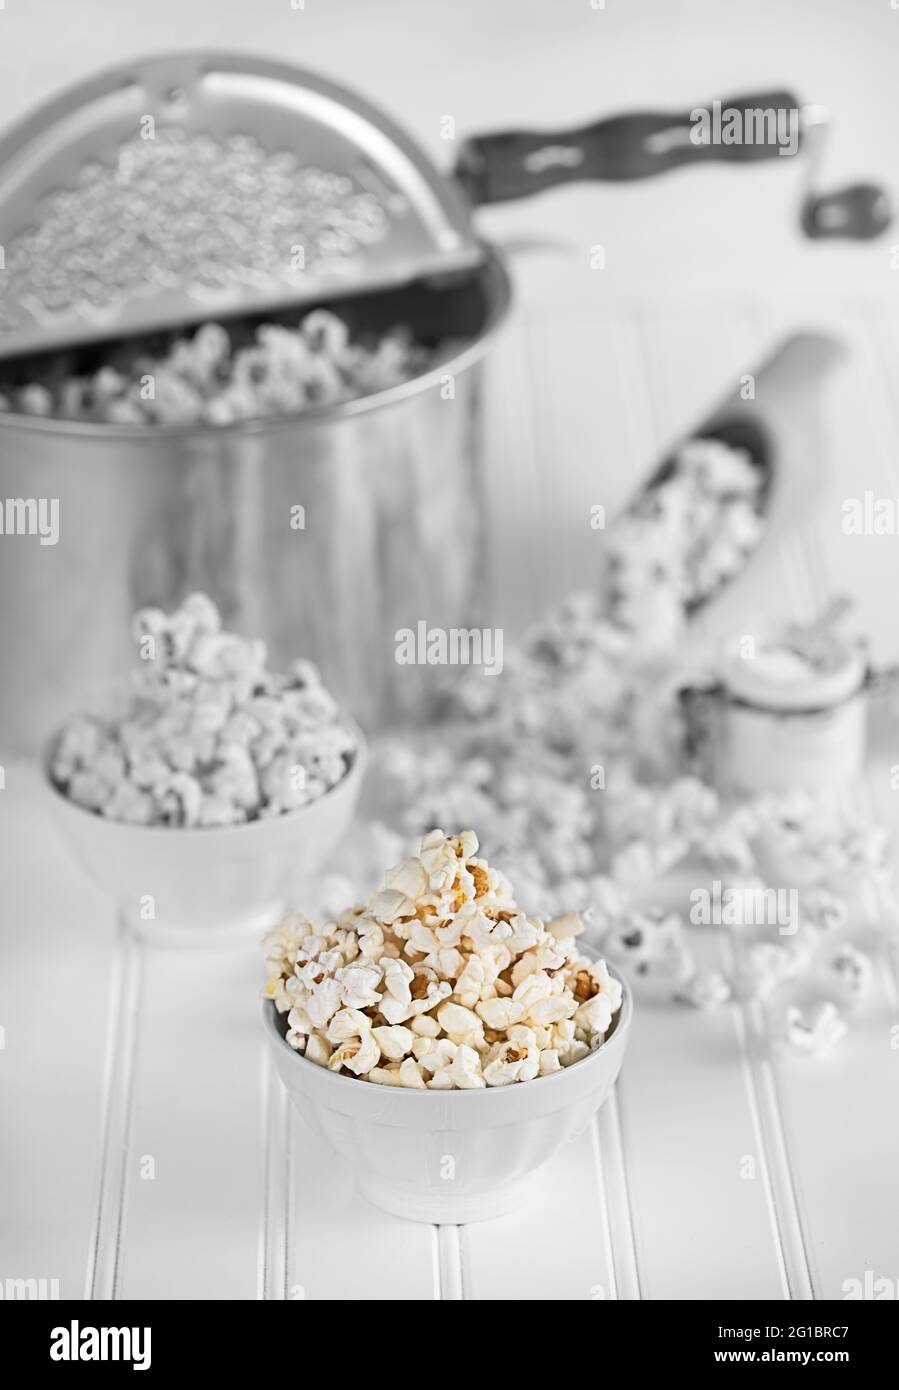 Old fashion popcorn maker, in messy popcorn scene, with white bowls full of popcorns, vintage ambience, wooden scoop. Stock Photo